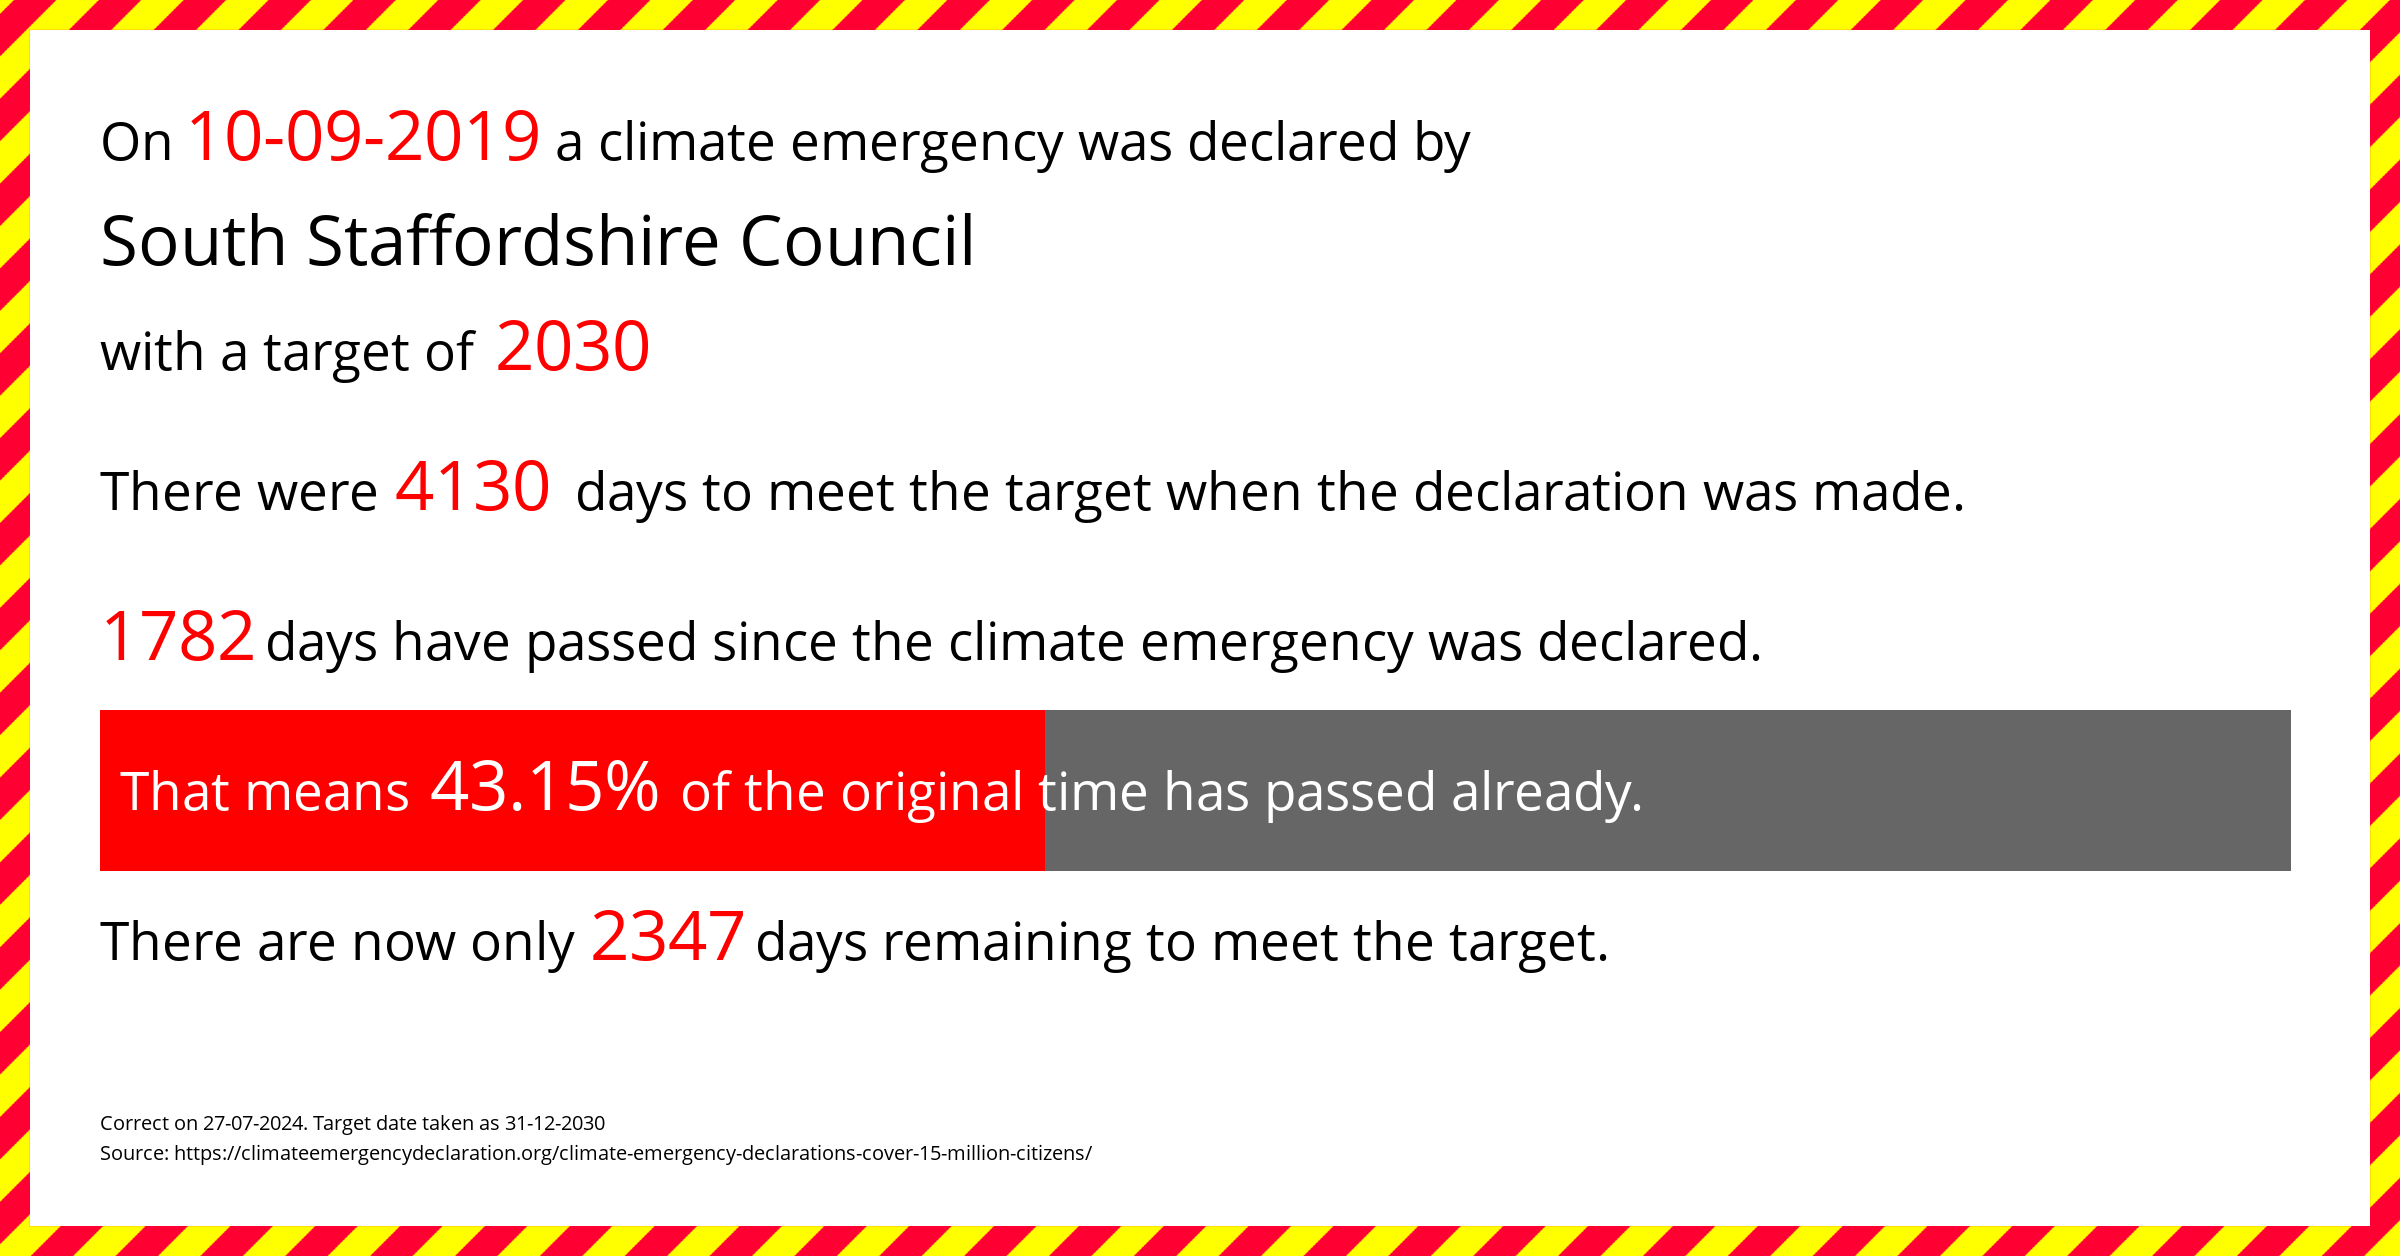 South Staffordshire Council declared a Climate emergency on Tuesday 10th September 2019, with a target of 2030.